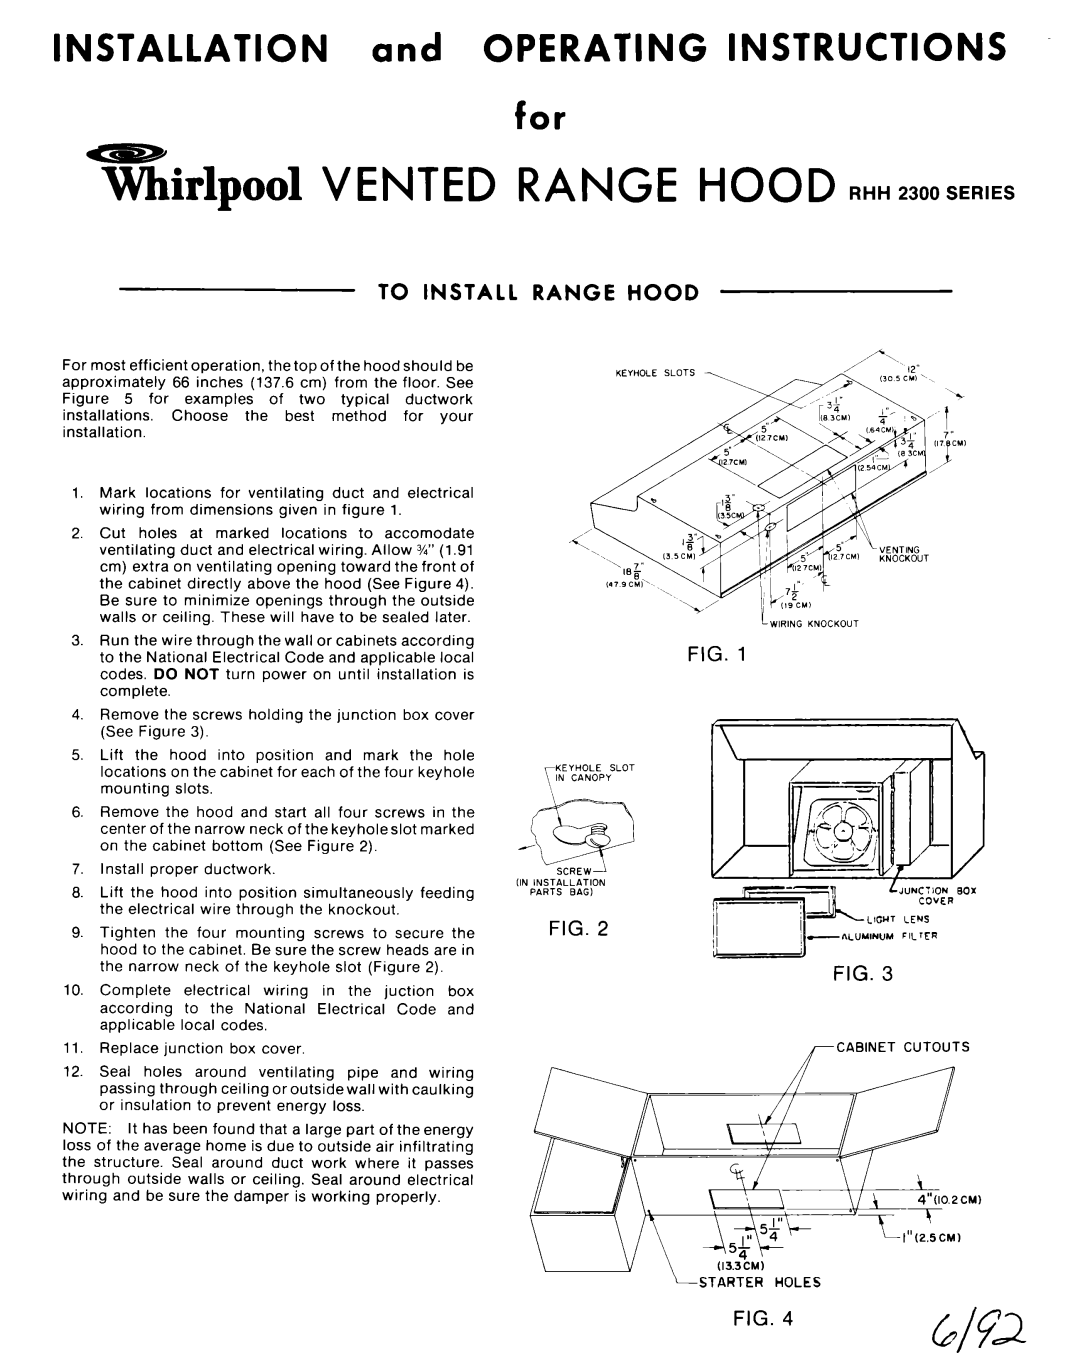 Whirlpool dimensions RHH 2300SERlES, INSTALLATION and OPERATING INSTRUCTIONS, f or, To Install, Range Hood, ~irlpool 